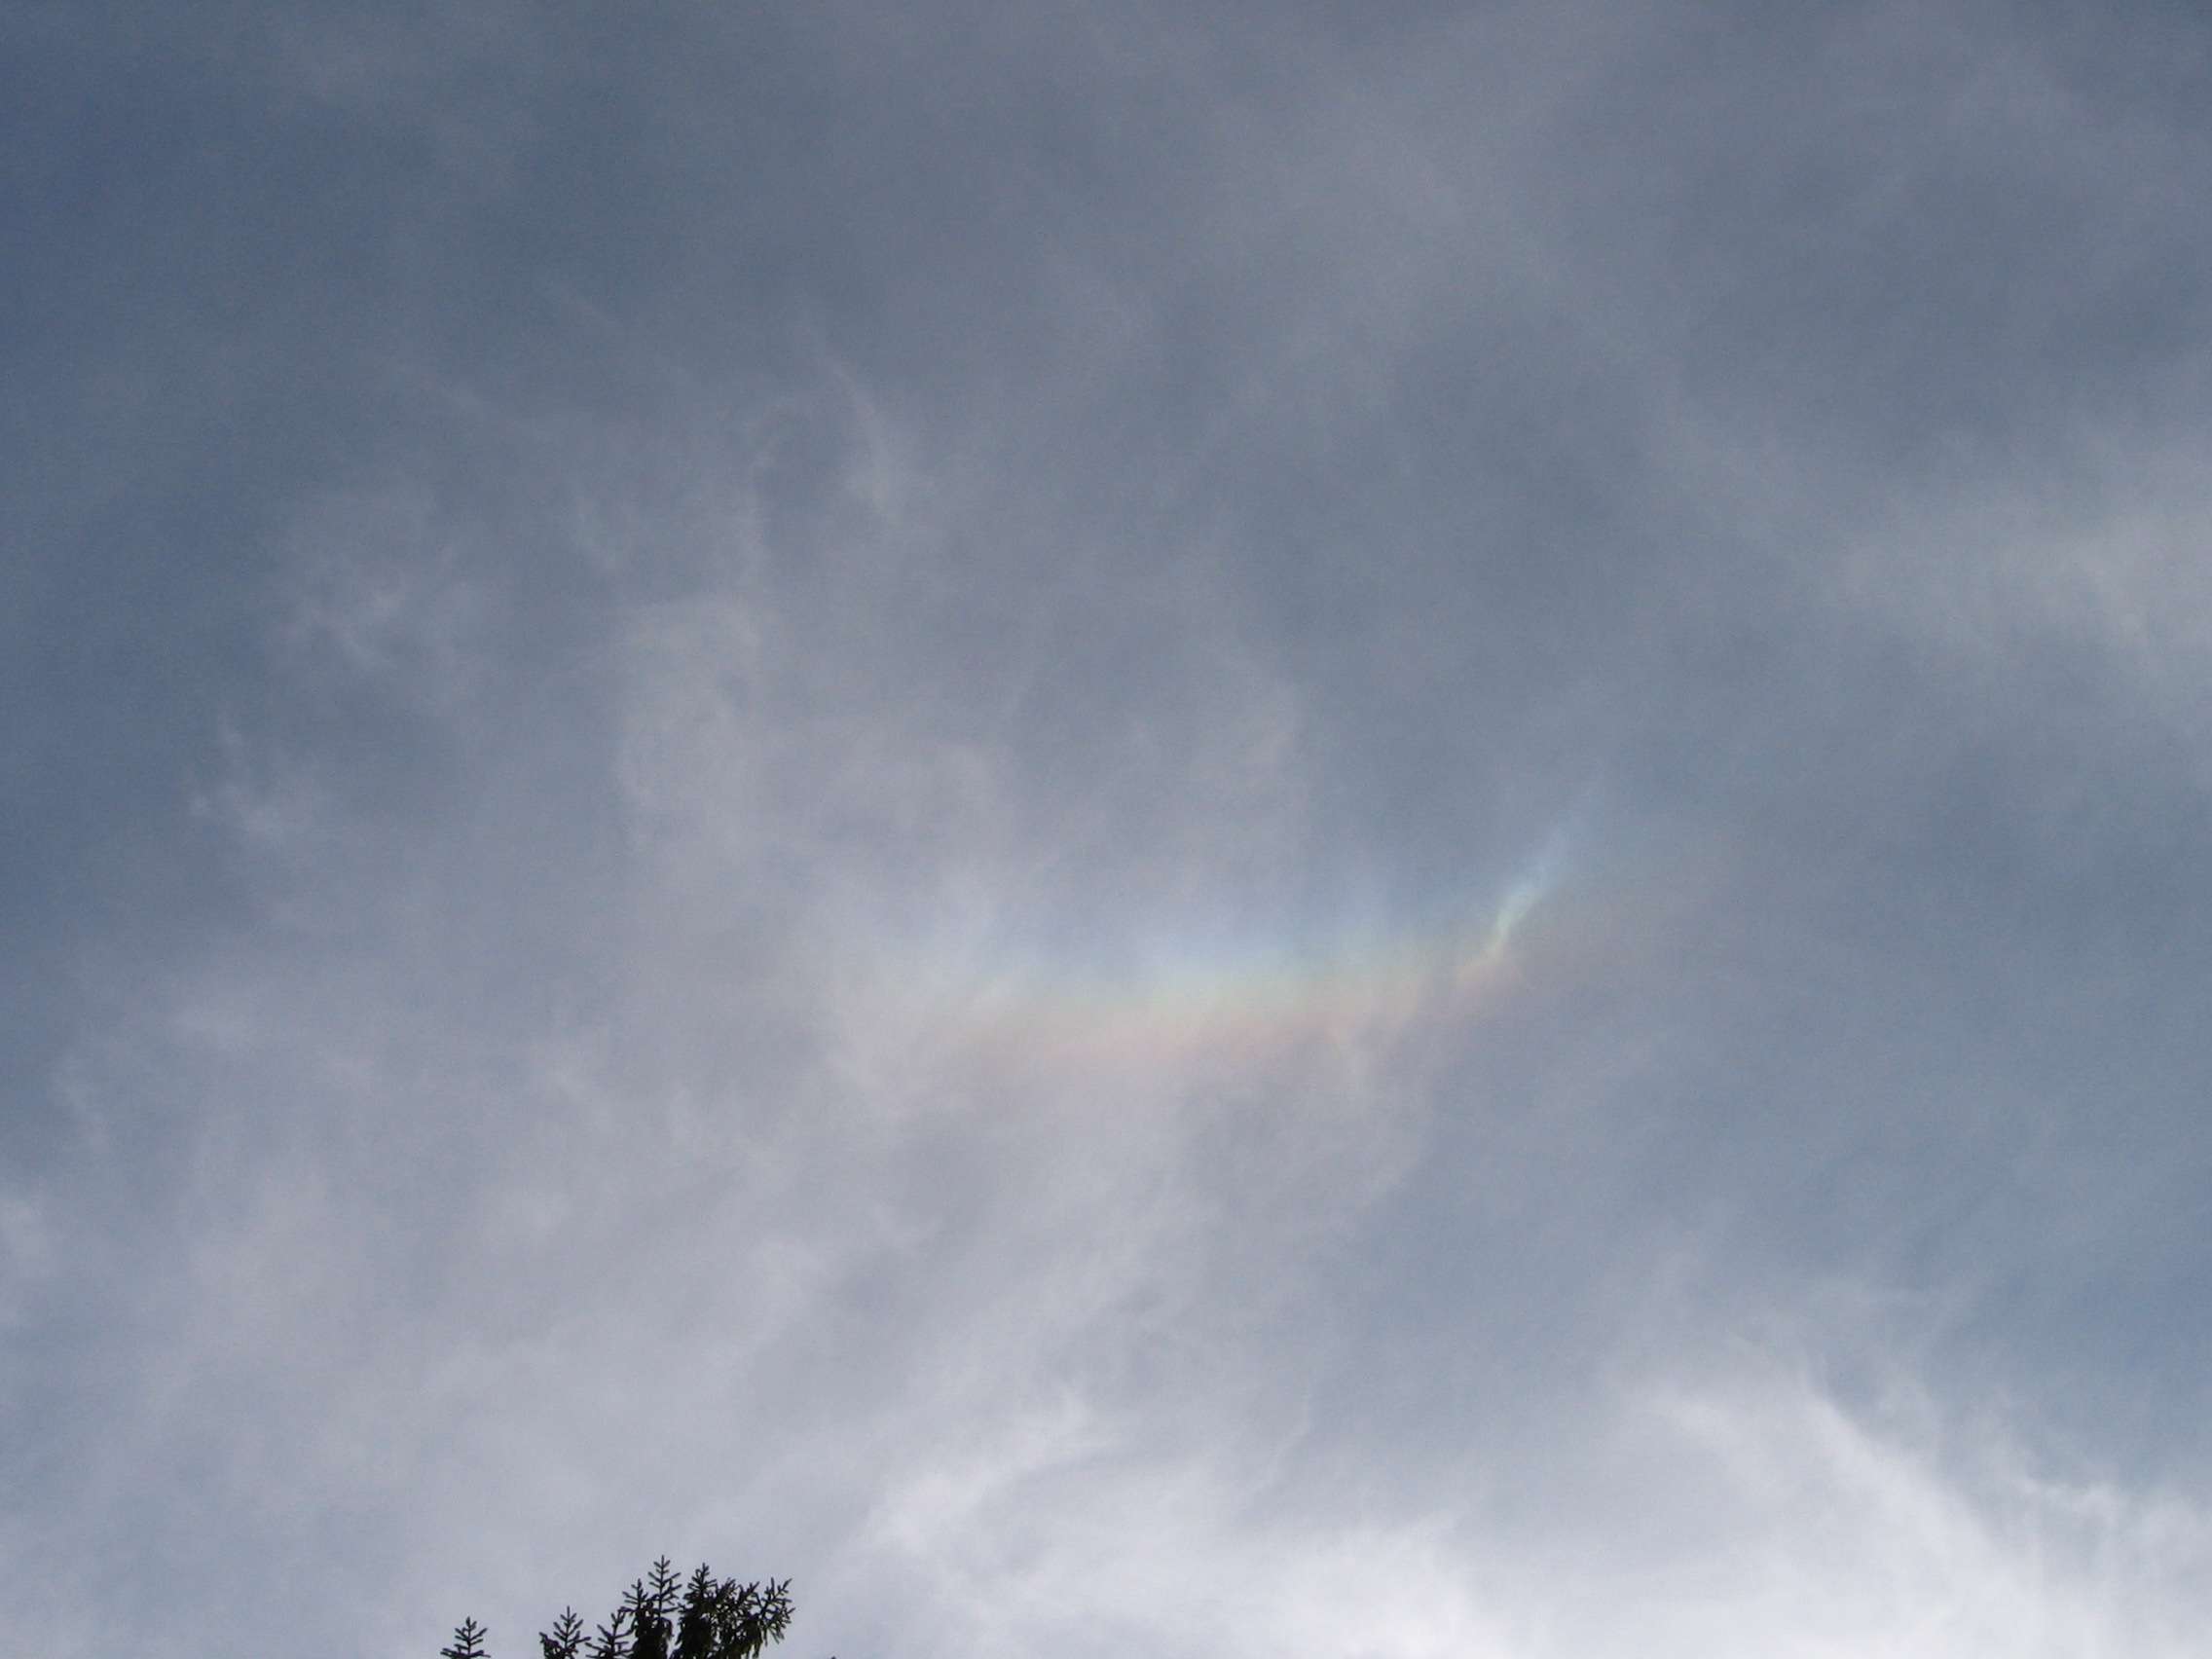 Circumzenithal arc: 111 KB; click on the image to enlarge at 2272x1704 pixels